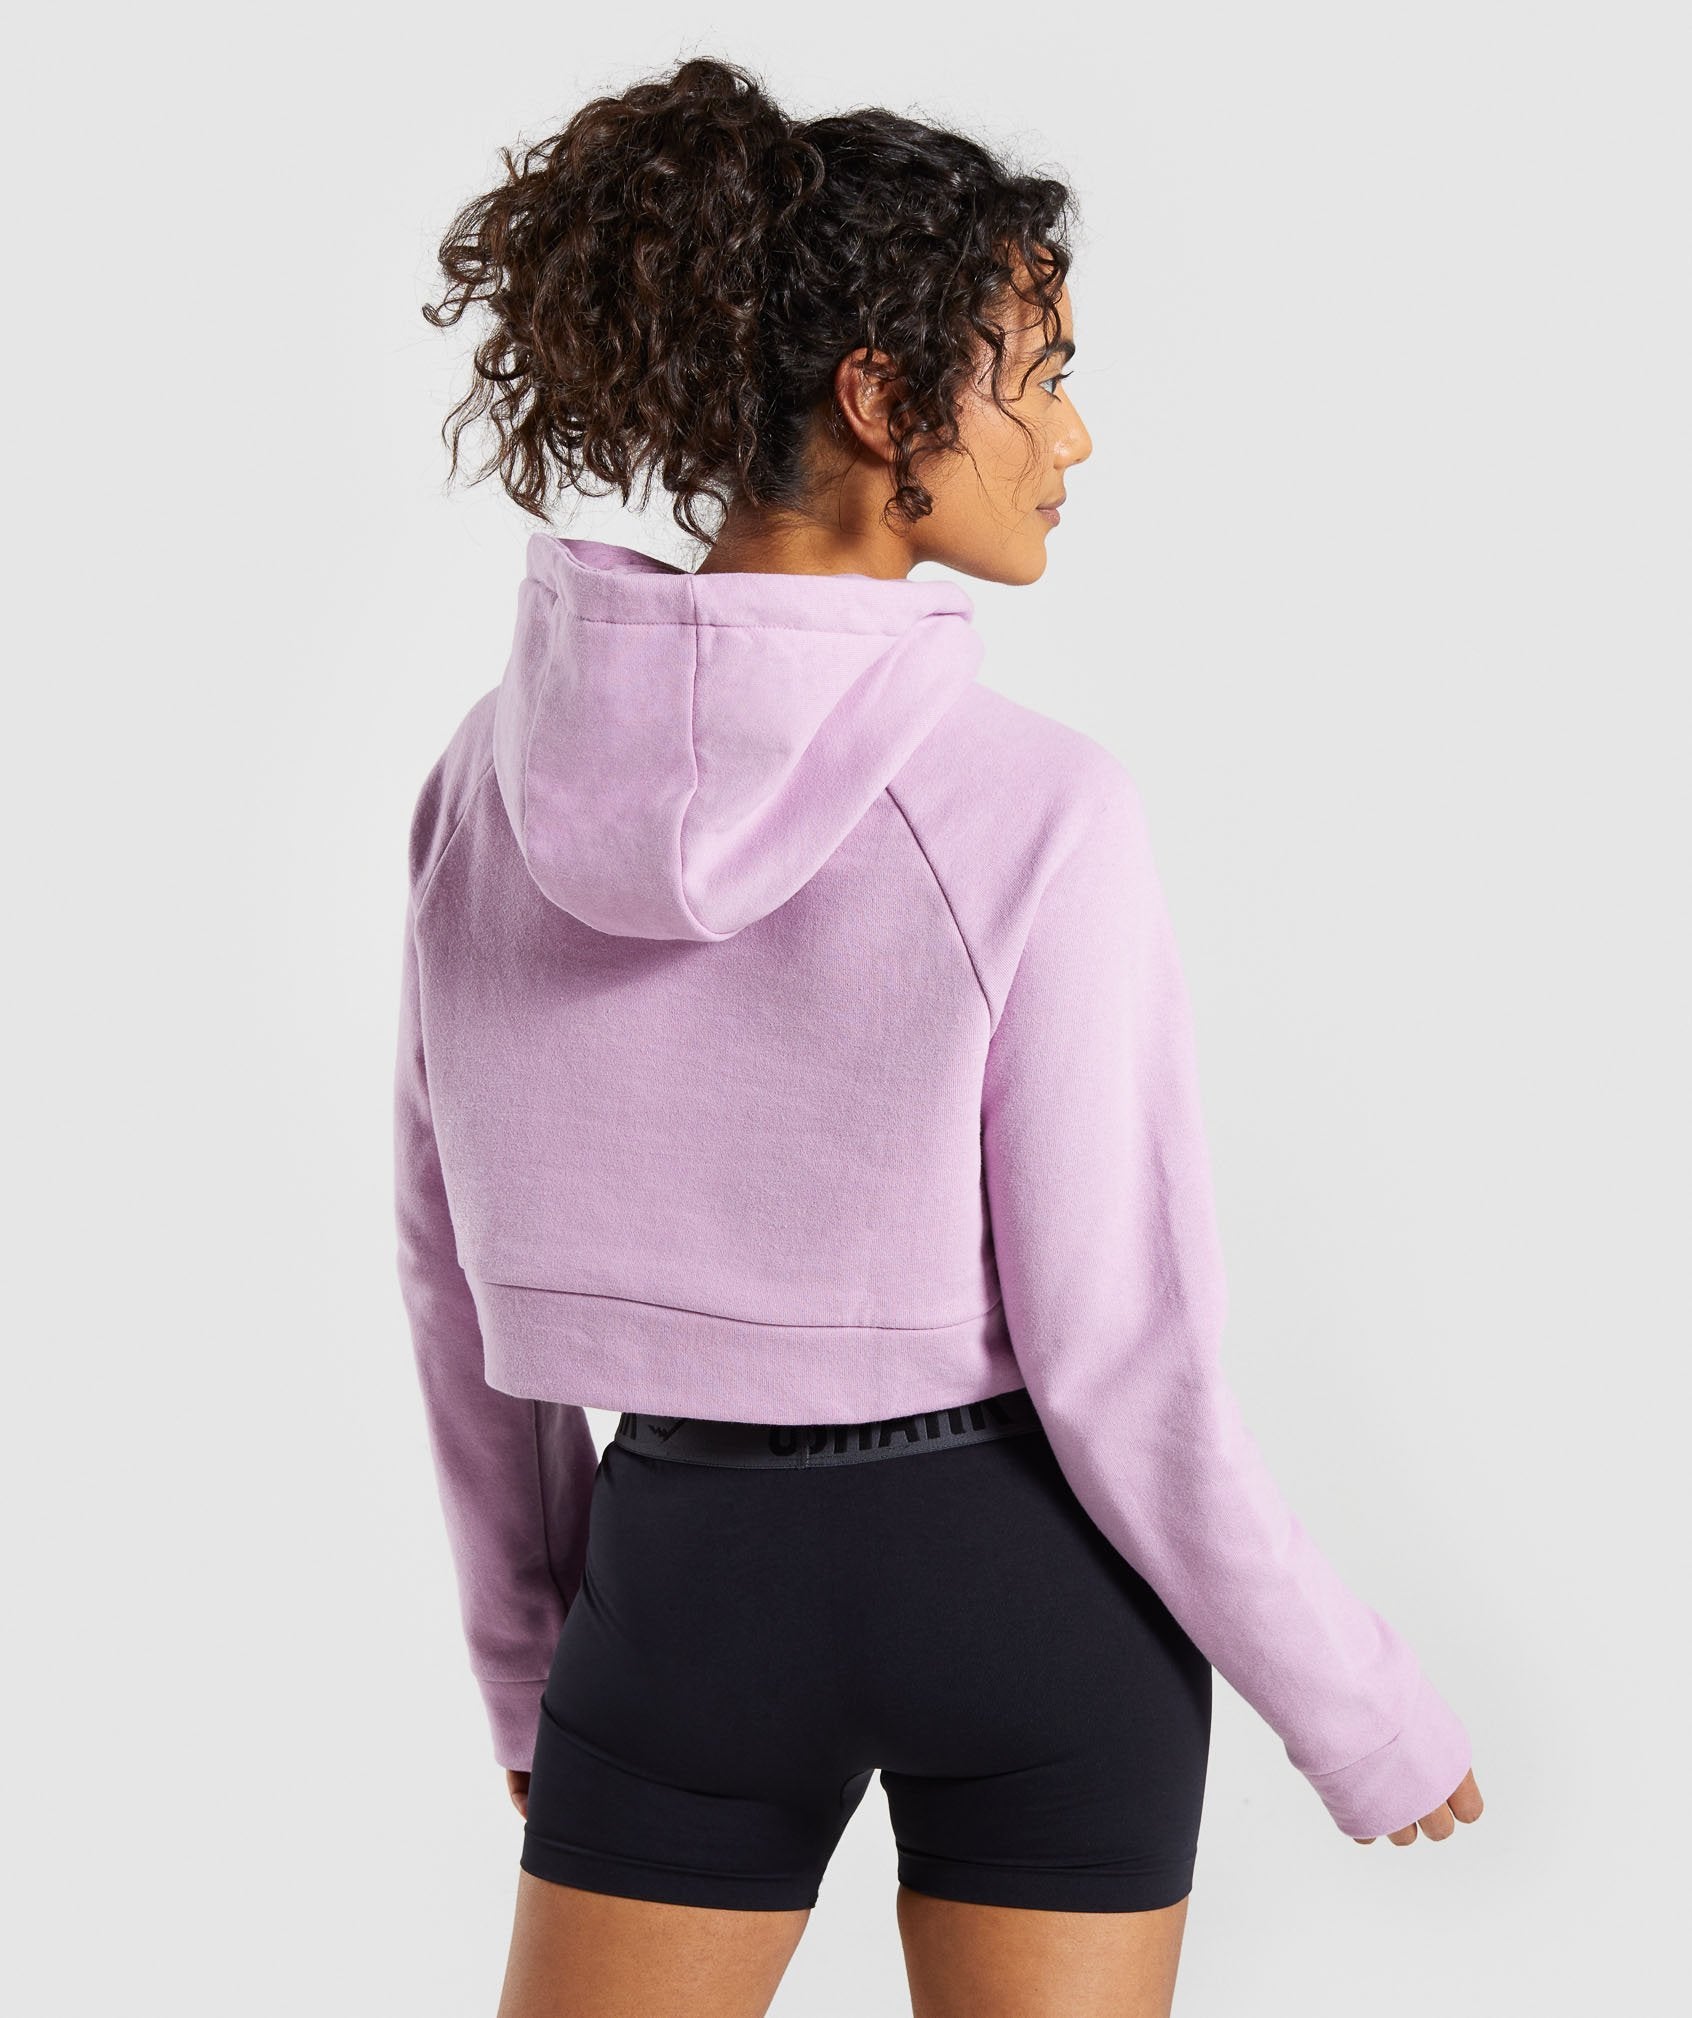 Cropped Crest Hoodie in Pink - view 2